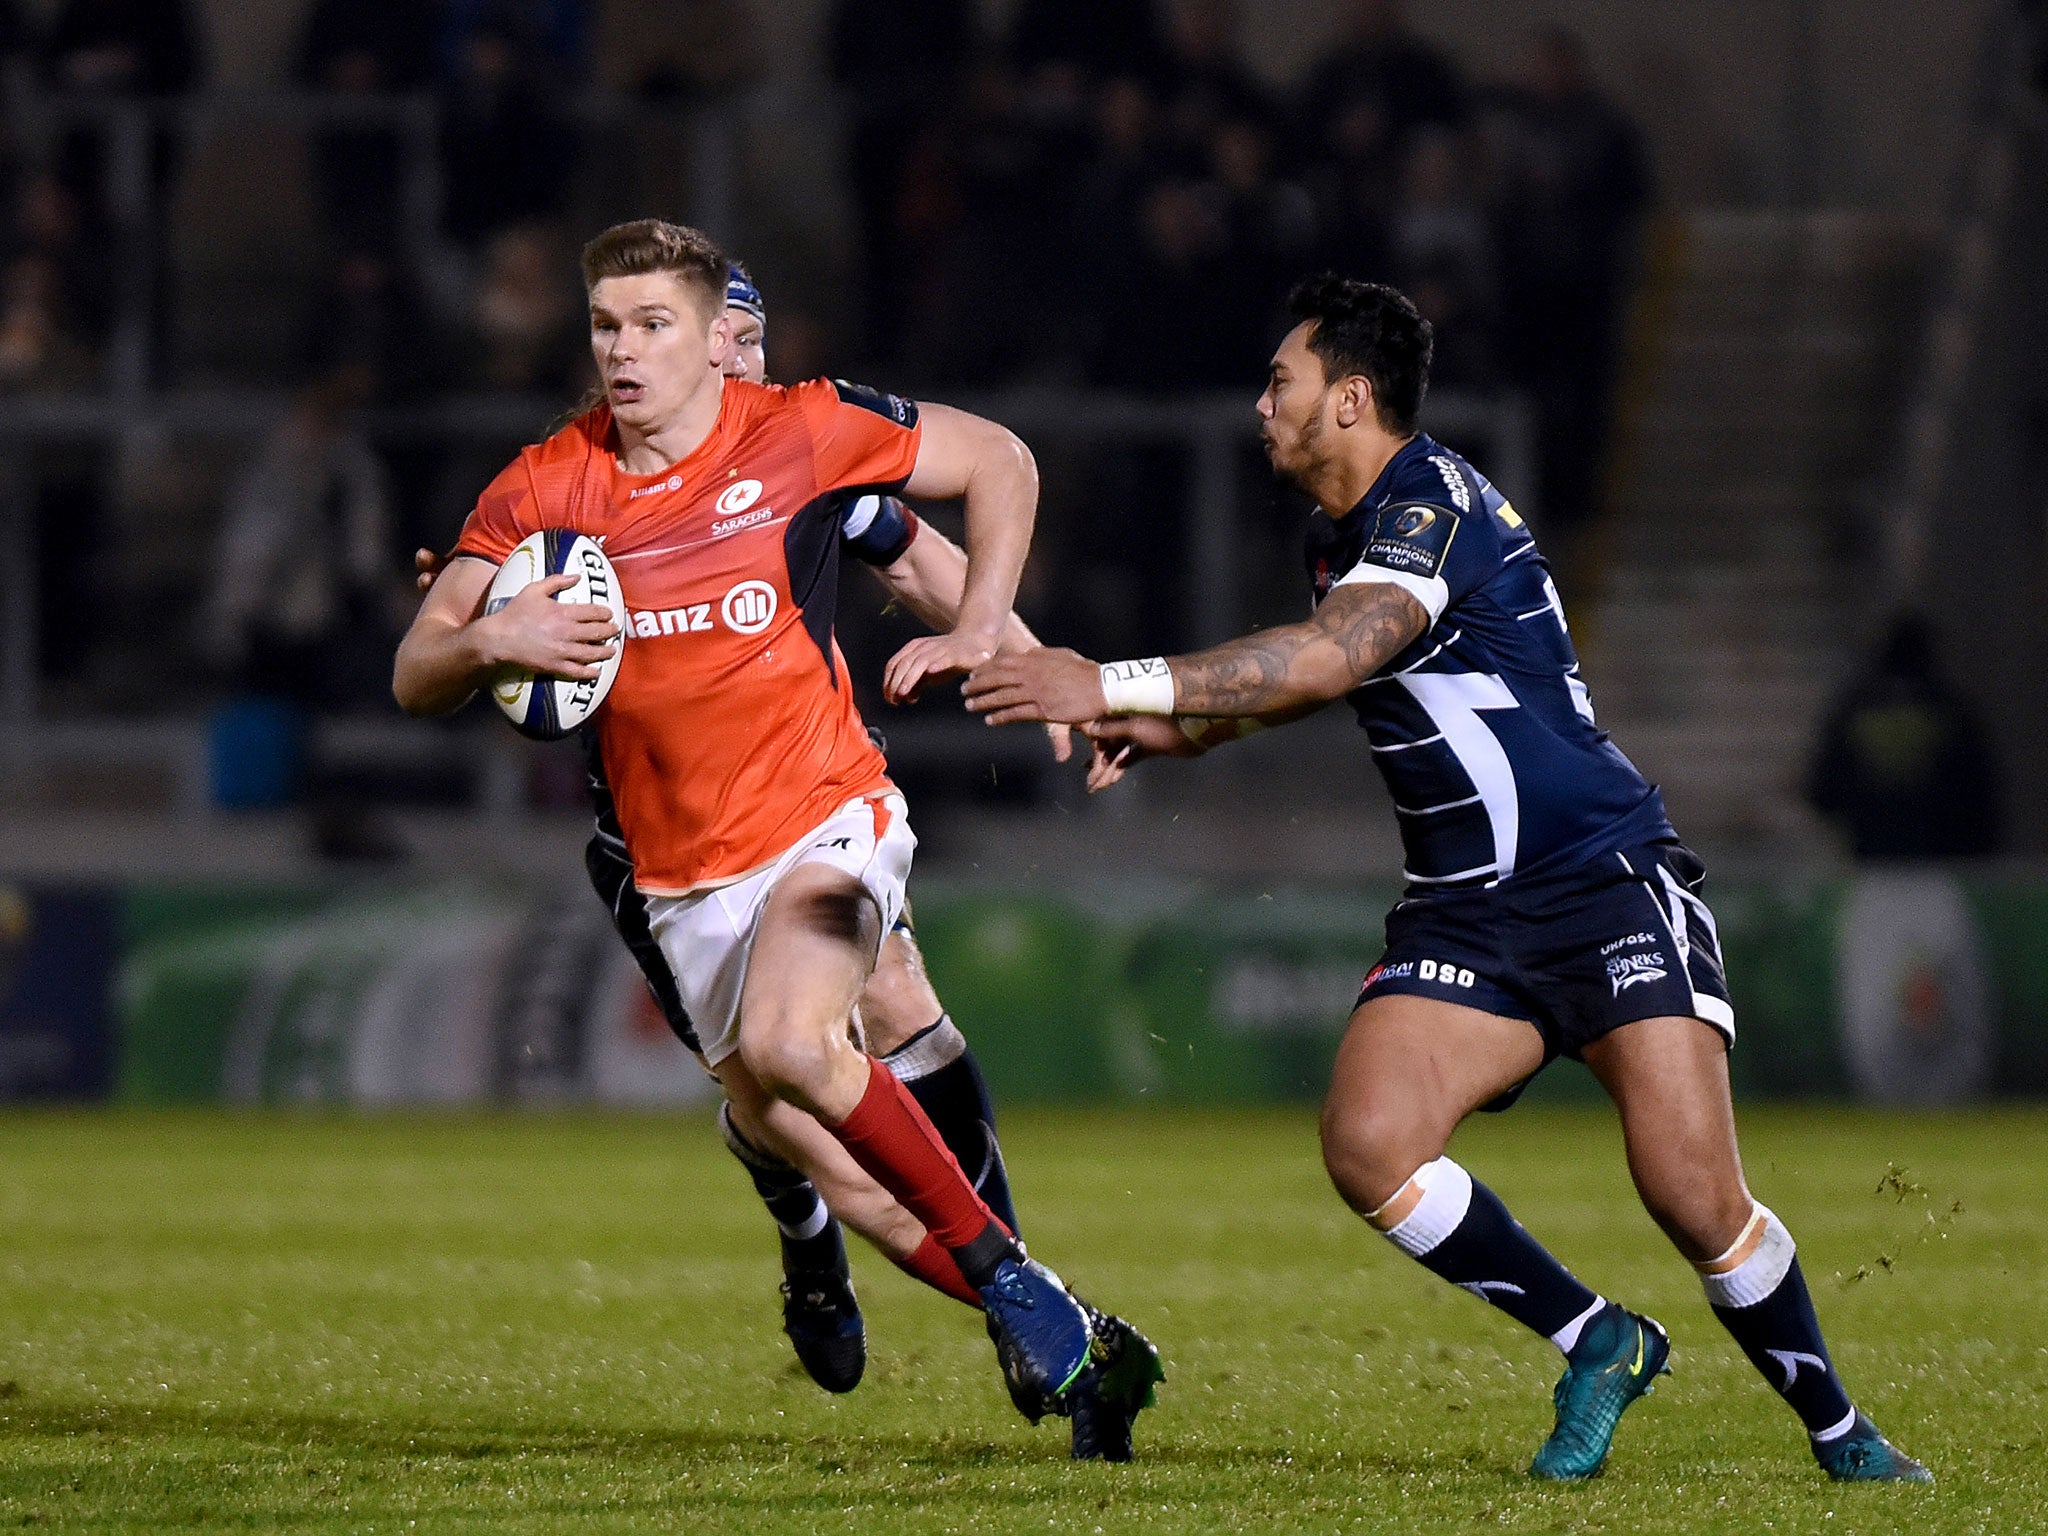 Owen Farrell helped kick Saracens to victory